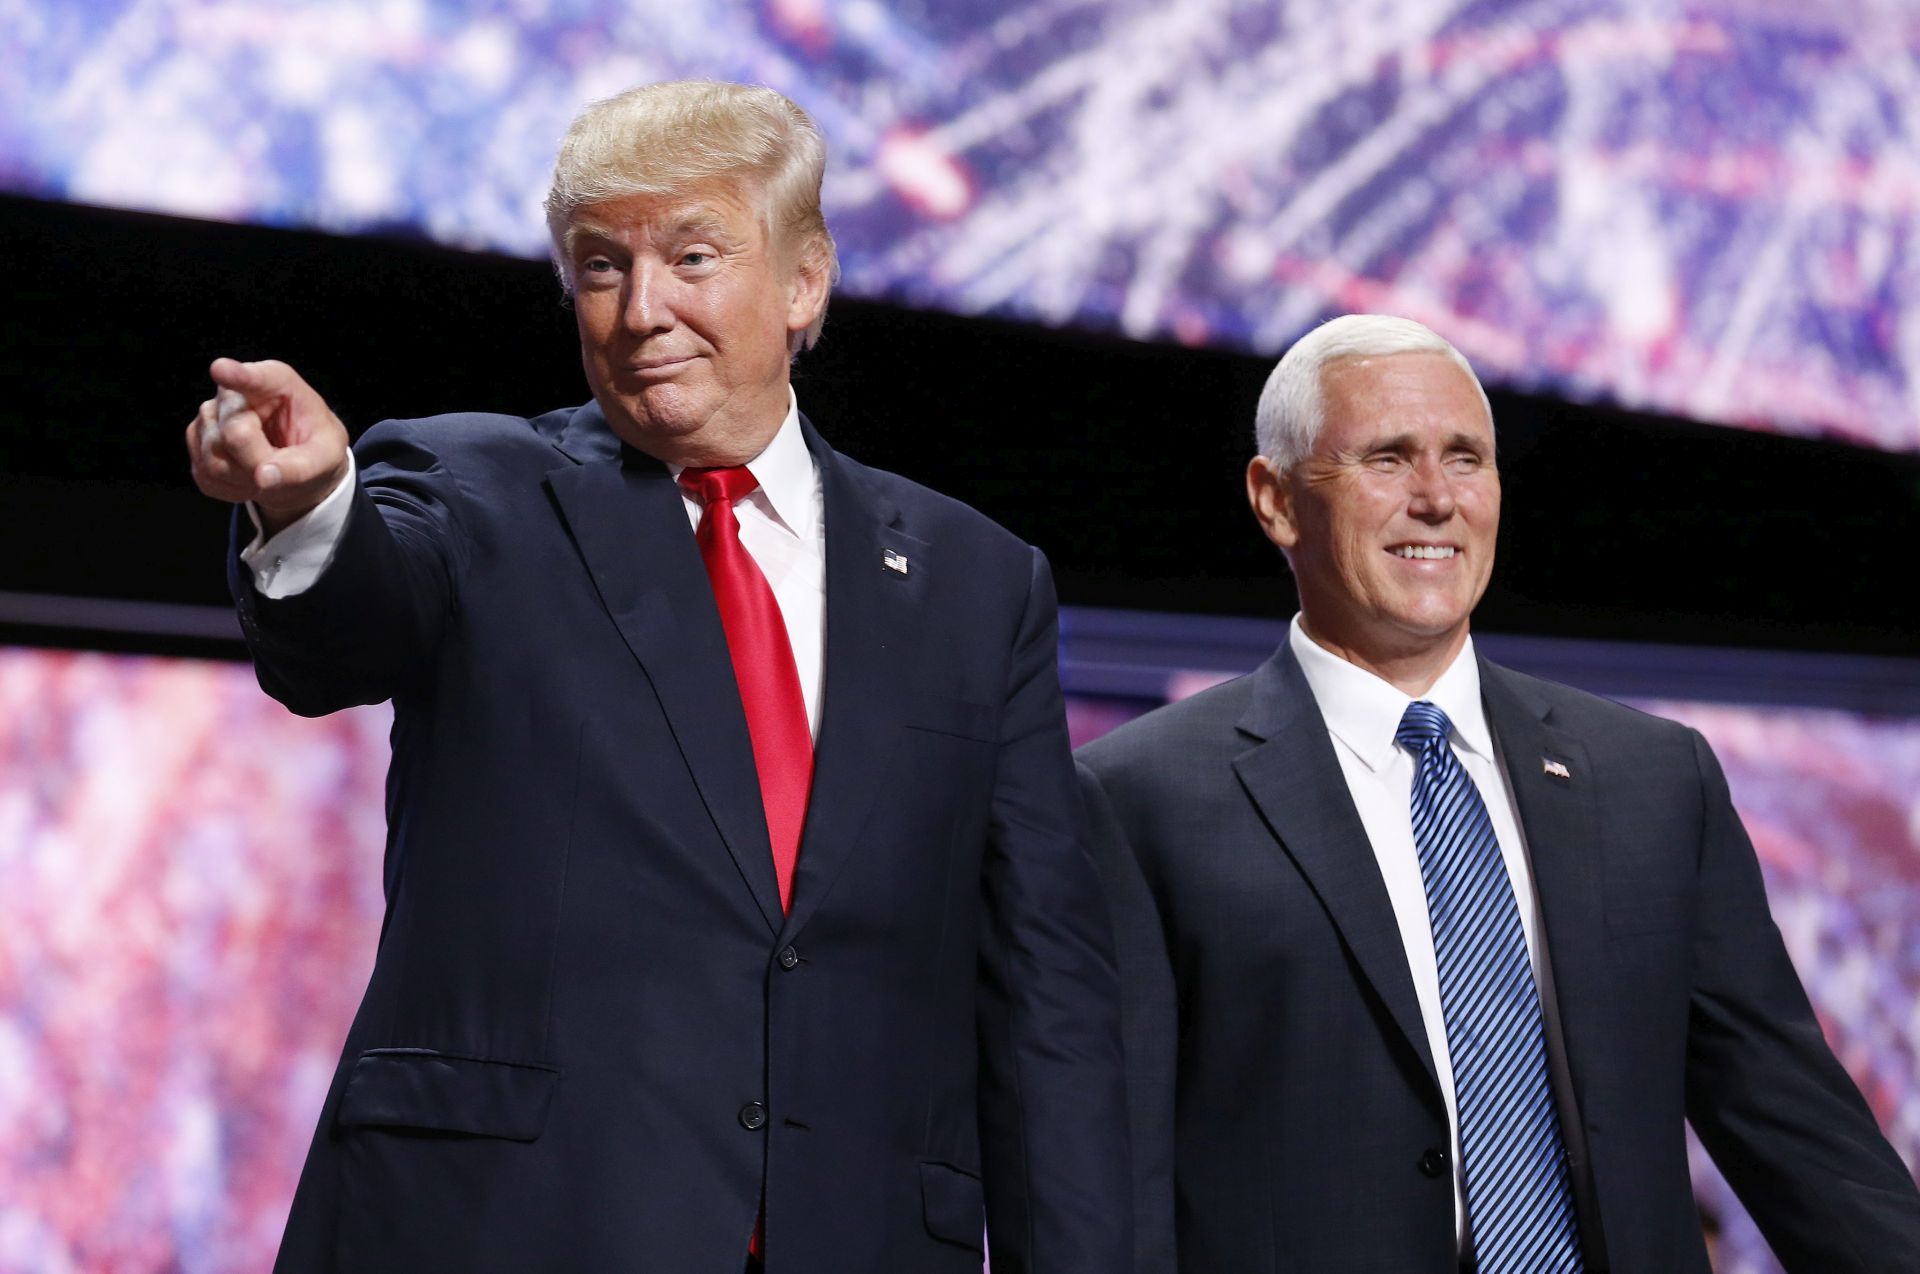 epa05436049 Republican Presidential nominee Donald Trump (L) and Vice Presidential nominee Mike Pence (R) during the final day of the 2016 Republican National Convention at Quicken Loans Arena in Cleveland, Ohio, USA, 21 July 2016.  Donald Trump formally accepted the nomination of the Republican Party as their presidential candidate in the 2016 election.  EPA/MICHAEL REYNOLDS